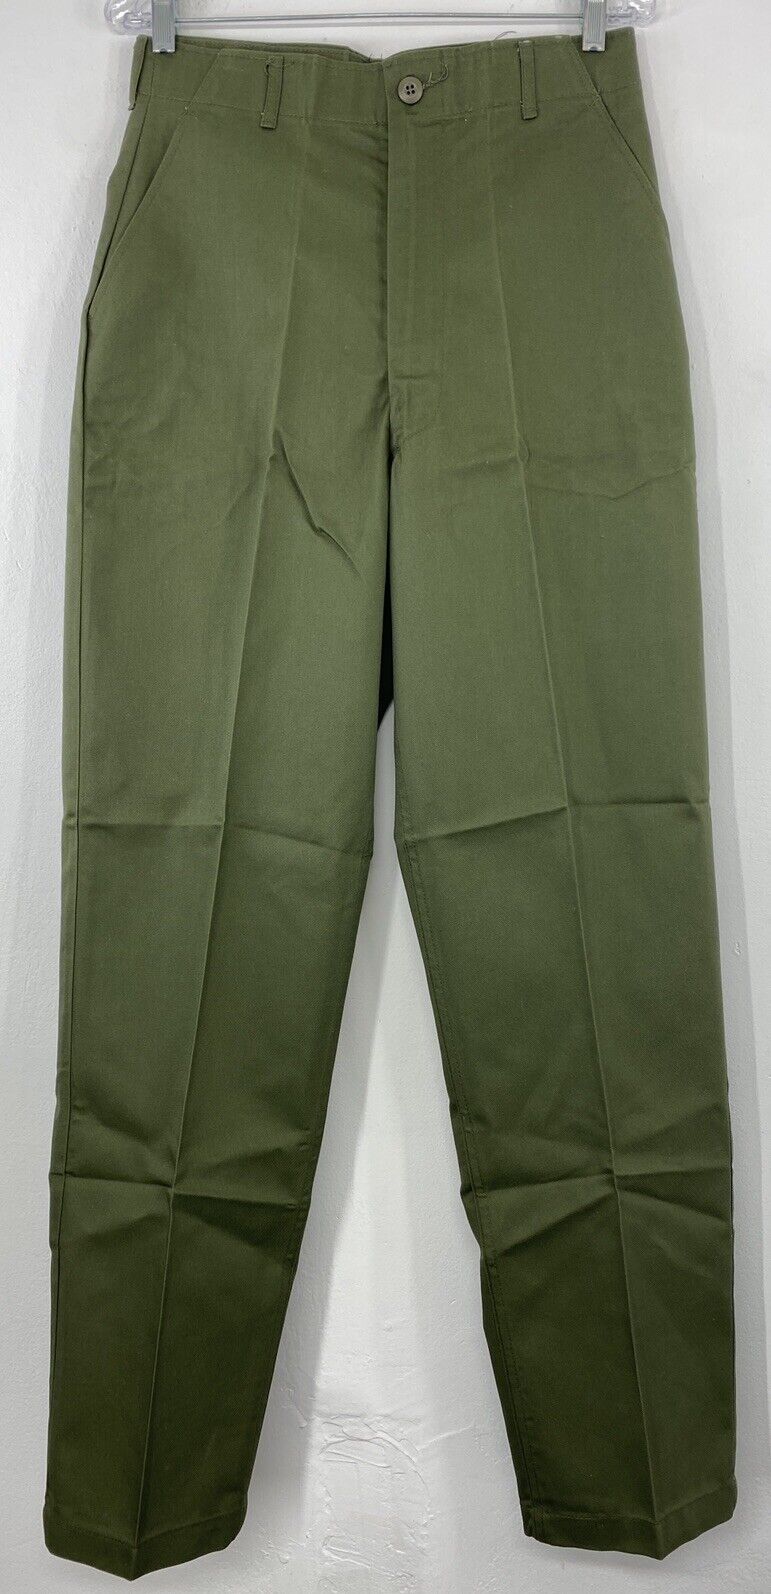 Vtg Army Military Utility Trouser Pants Actual 30x32.5 OG-507 Tagged 32x33